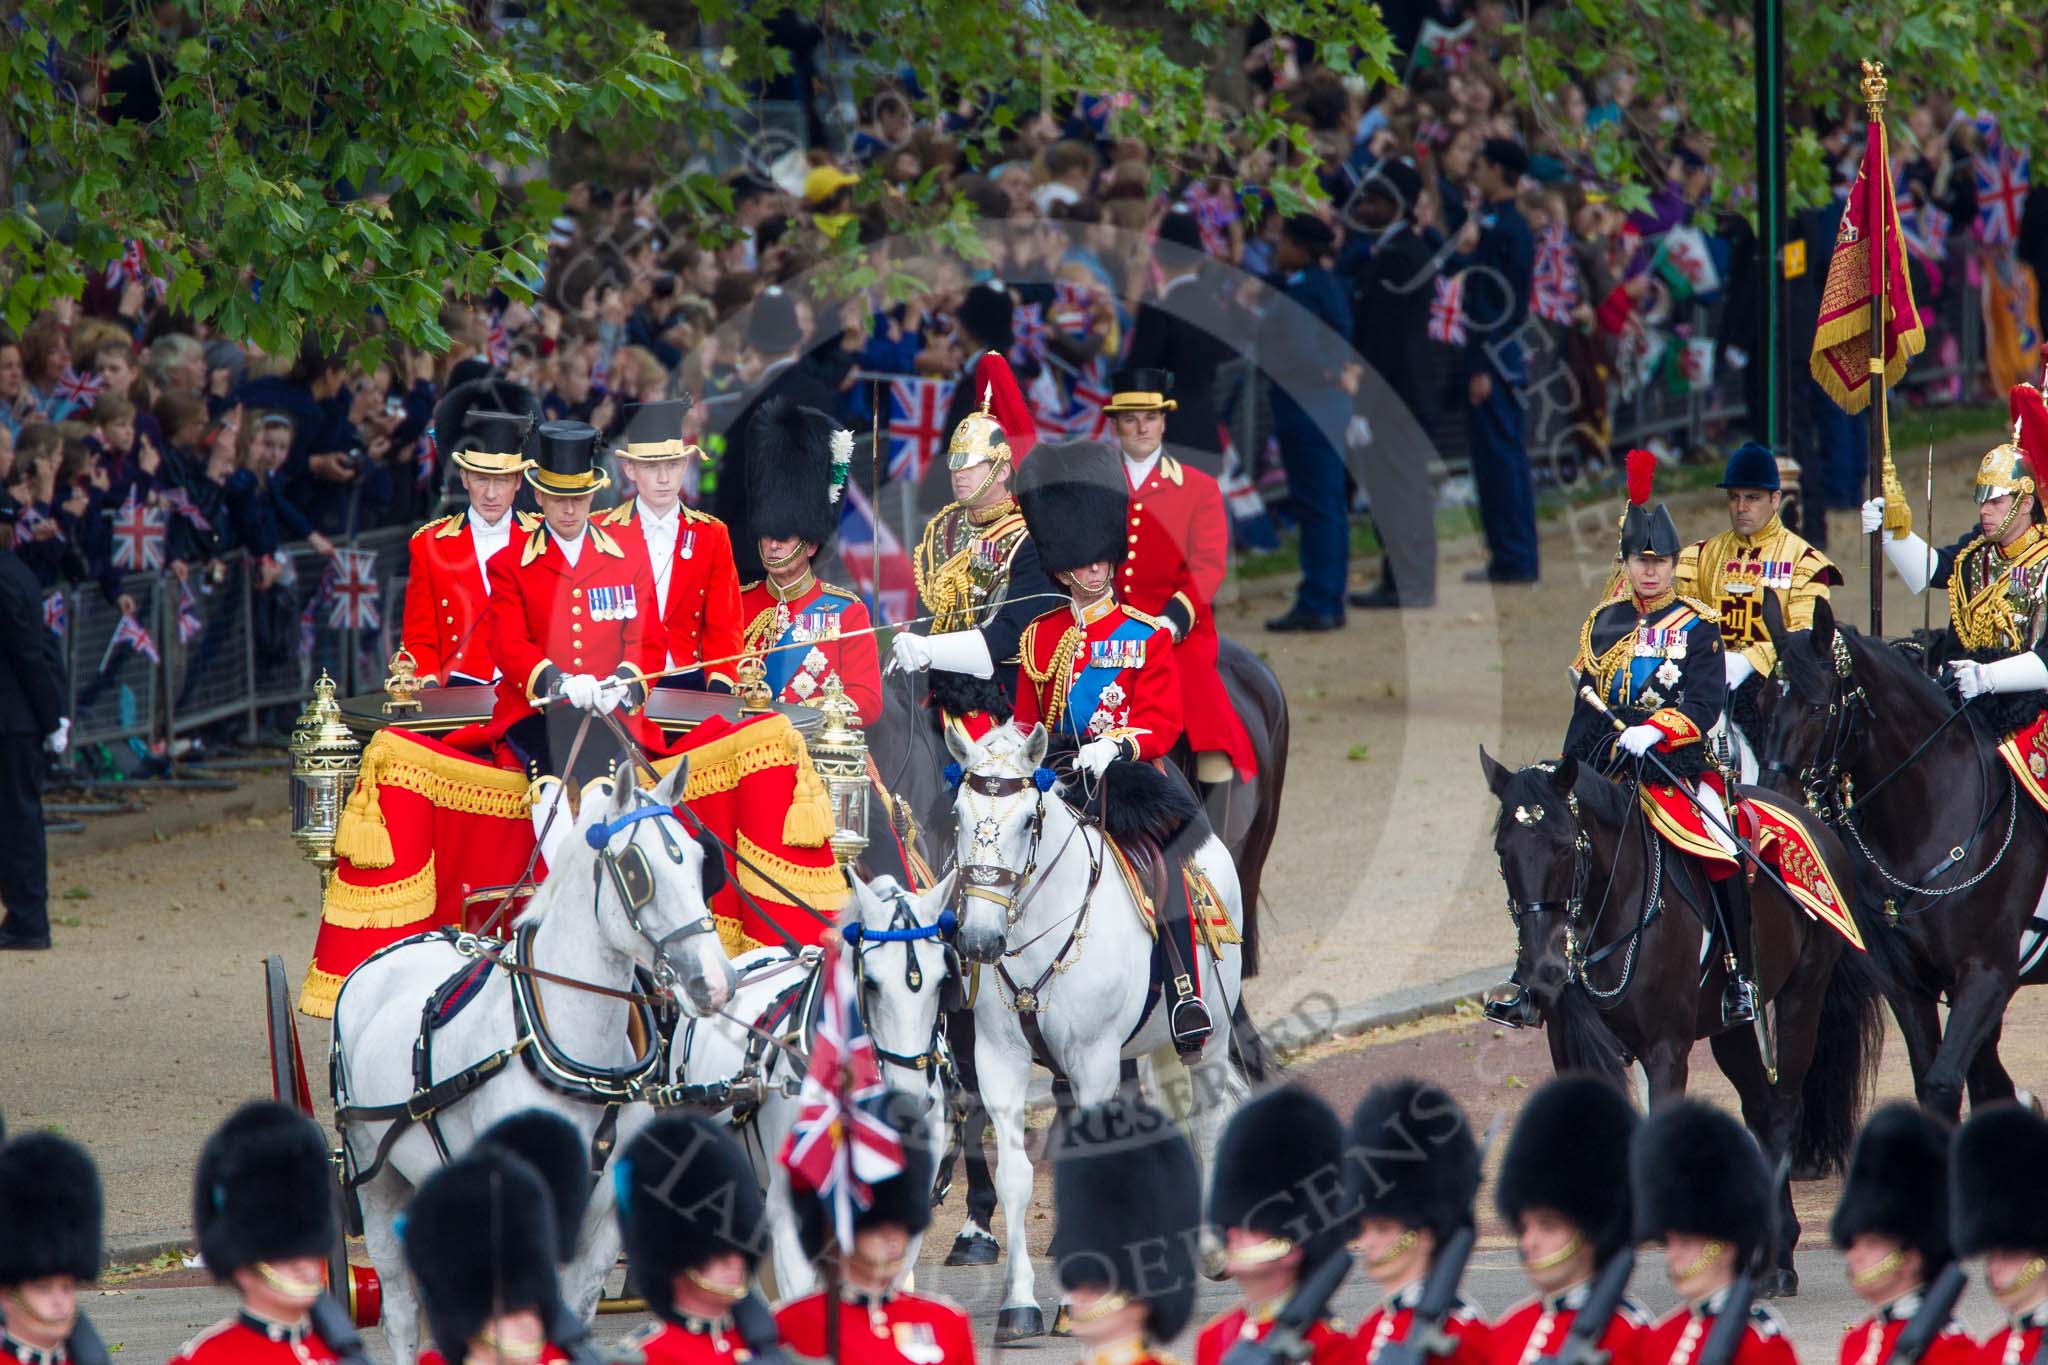 Trooping the Colour 2012: Just visible behind the Glass Coach - HRH The Prince of Wales and HRH the Duke of Kent, and on the right the Princess Royal as Royal Colonels..
Horse Guards Parade, Westminster,
London SW1,

United Kingdom,
on 16 June 2012 at 10:58, image #150